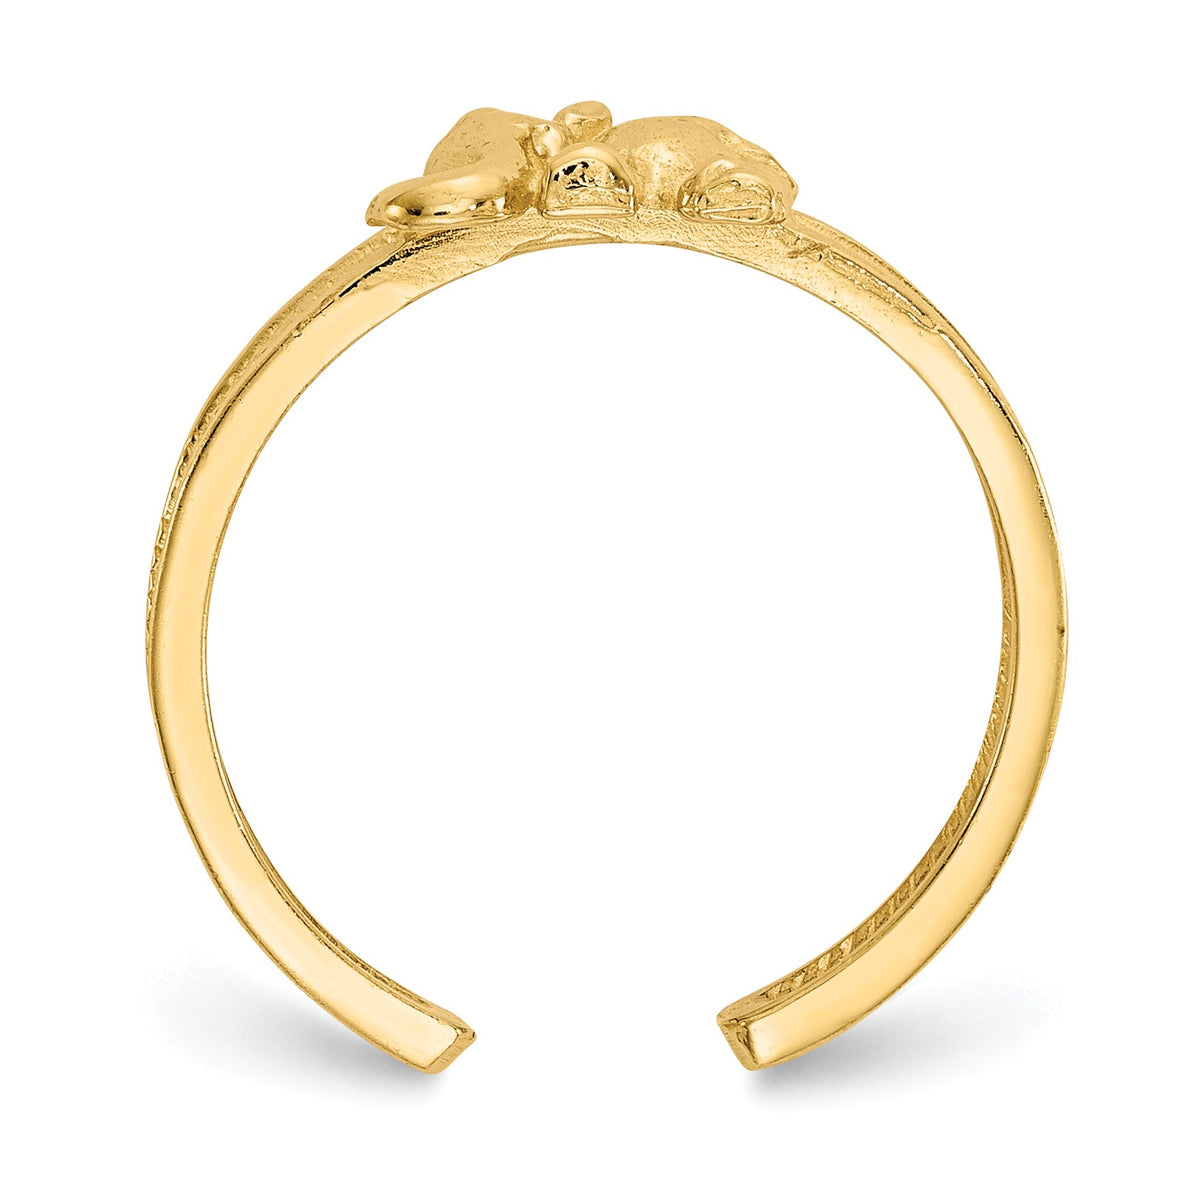 Alternate view of the Elephant Toe Ring in 14 Karat Gold by The Black Bow Jewelry Co.